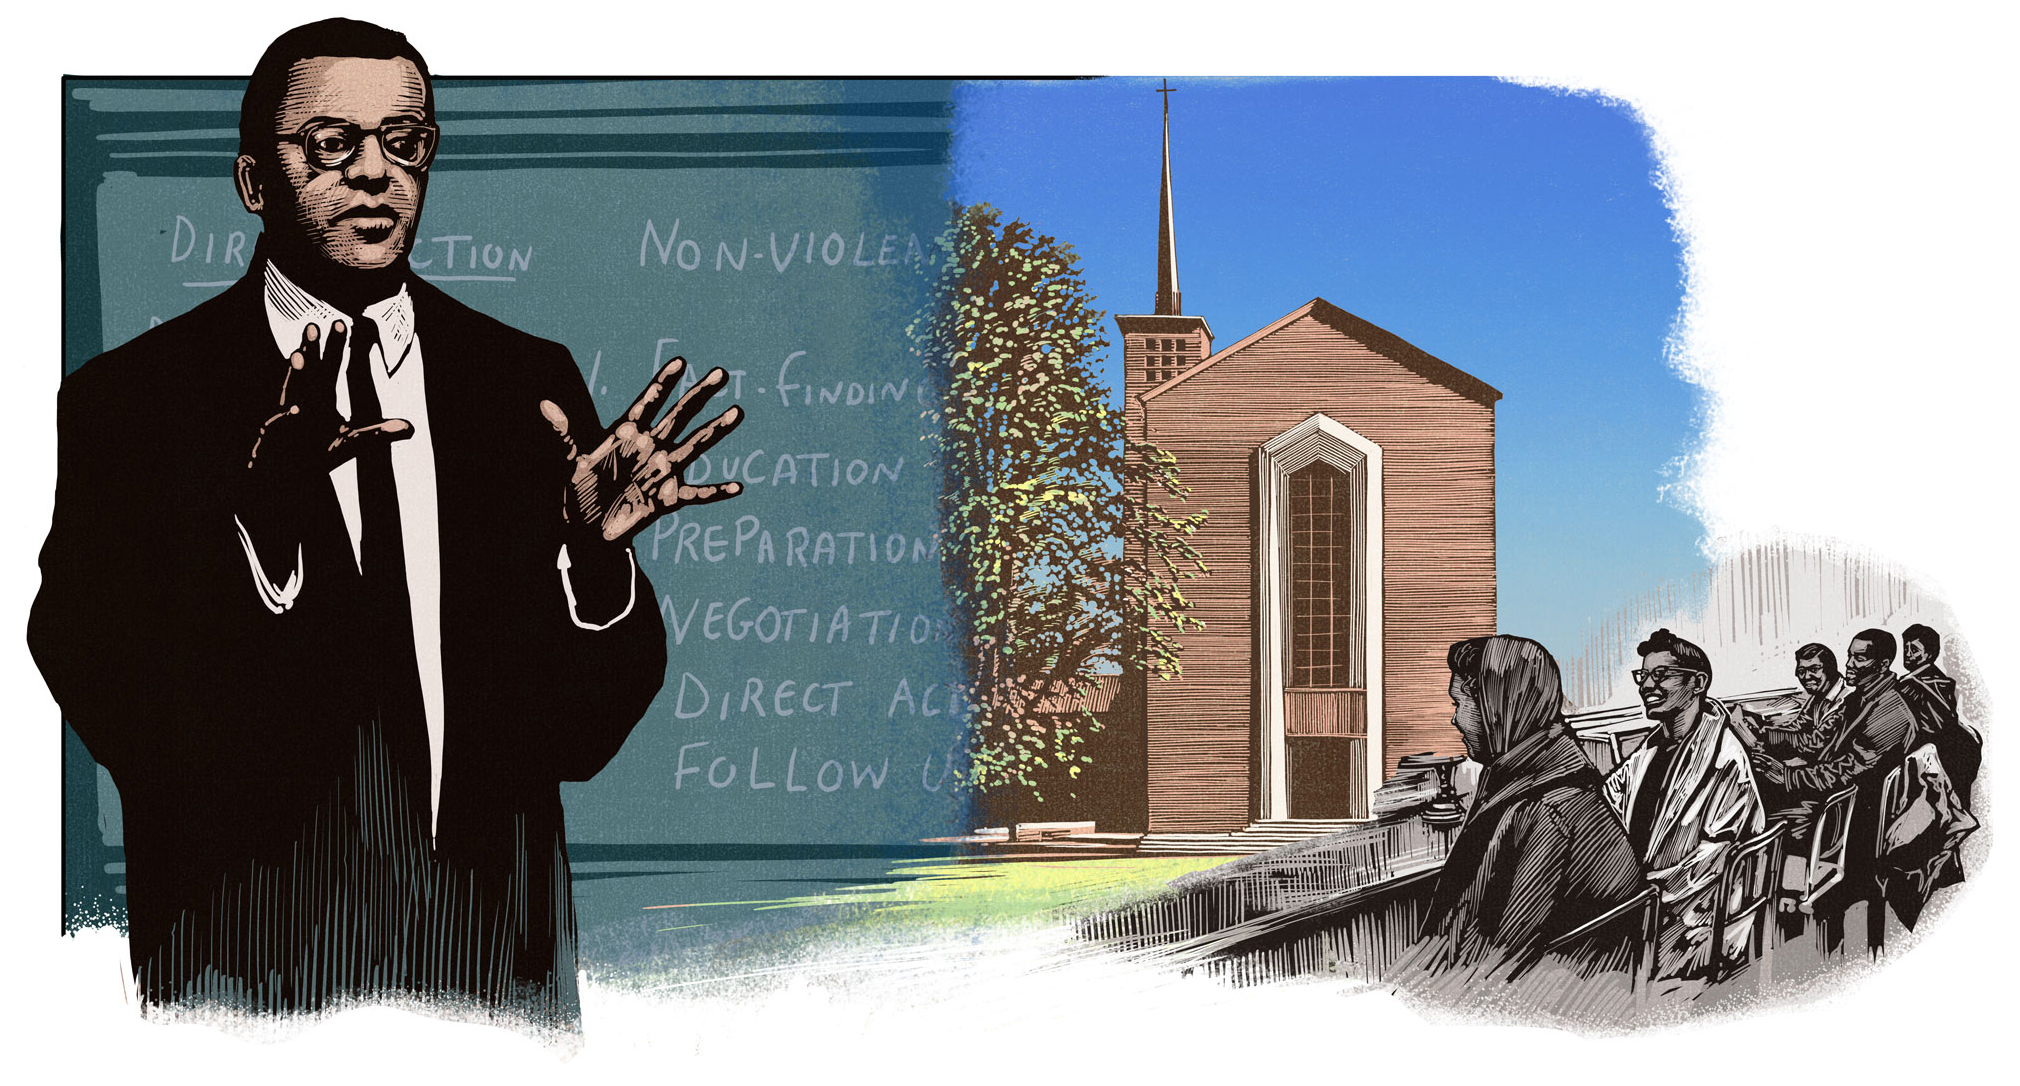 illustration of James Lawson teaching at a chalkboard